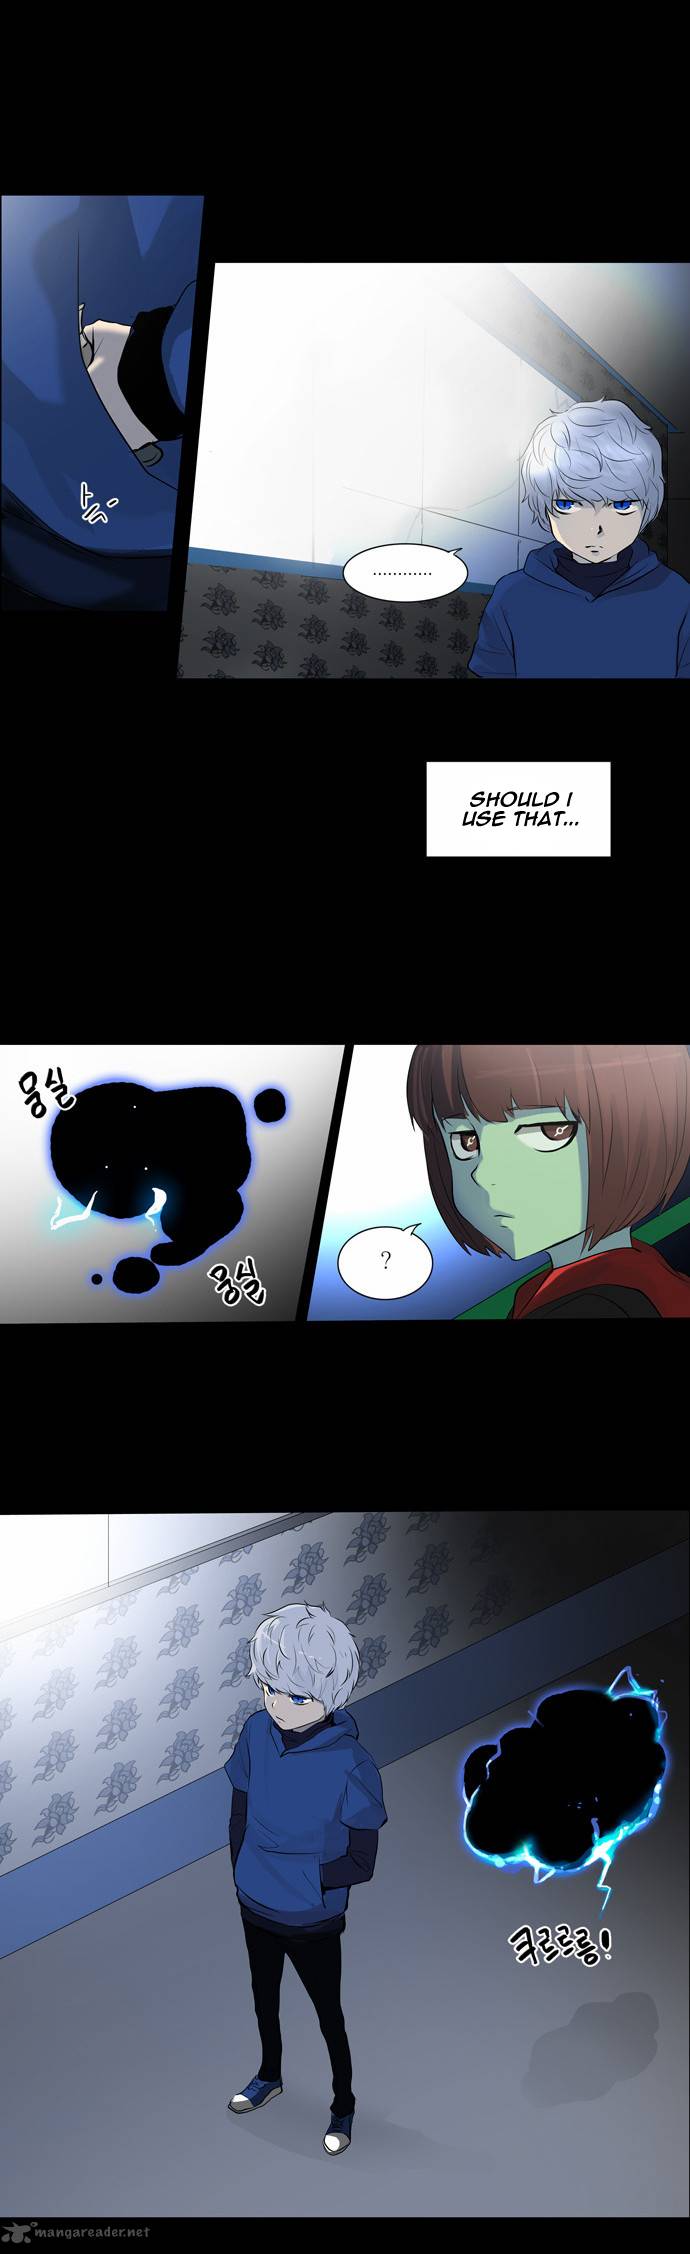 Tower Of God 141 24